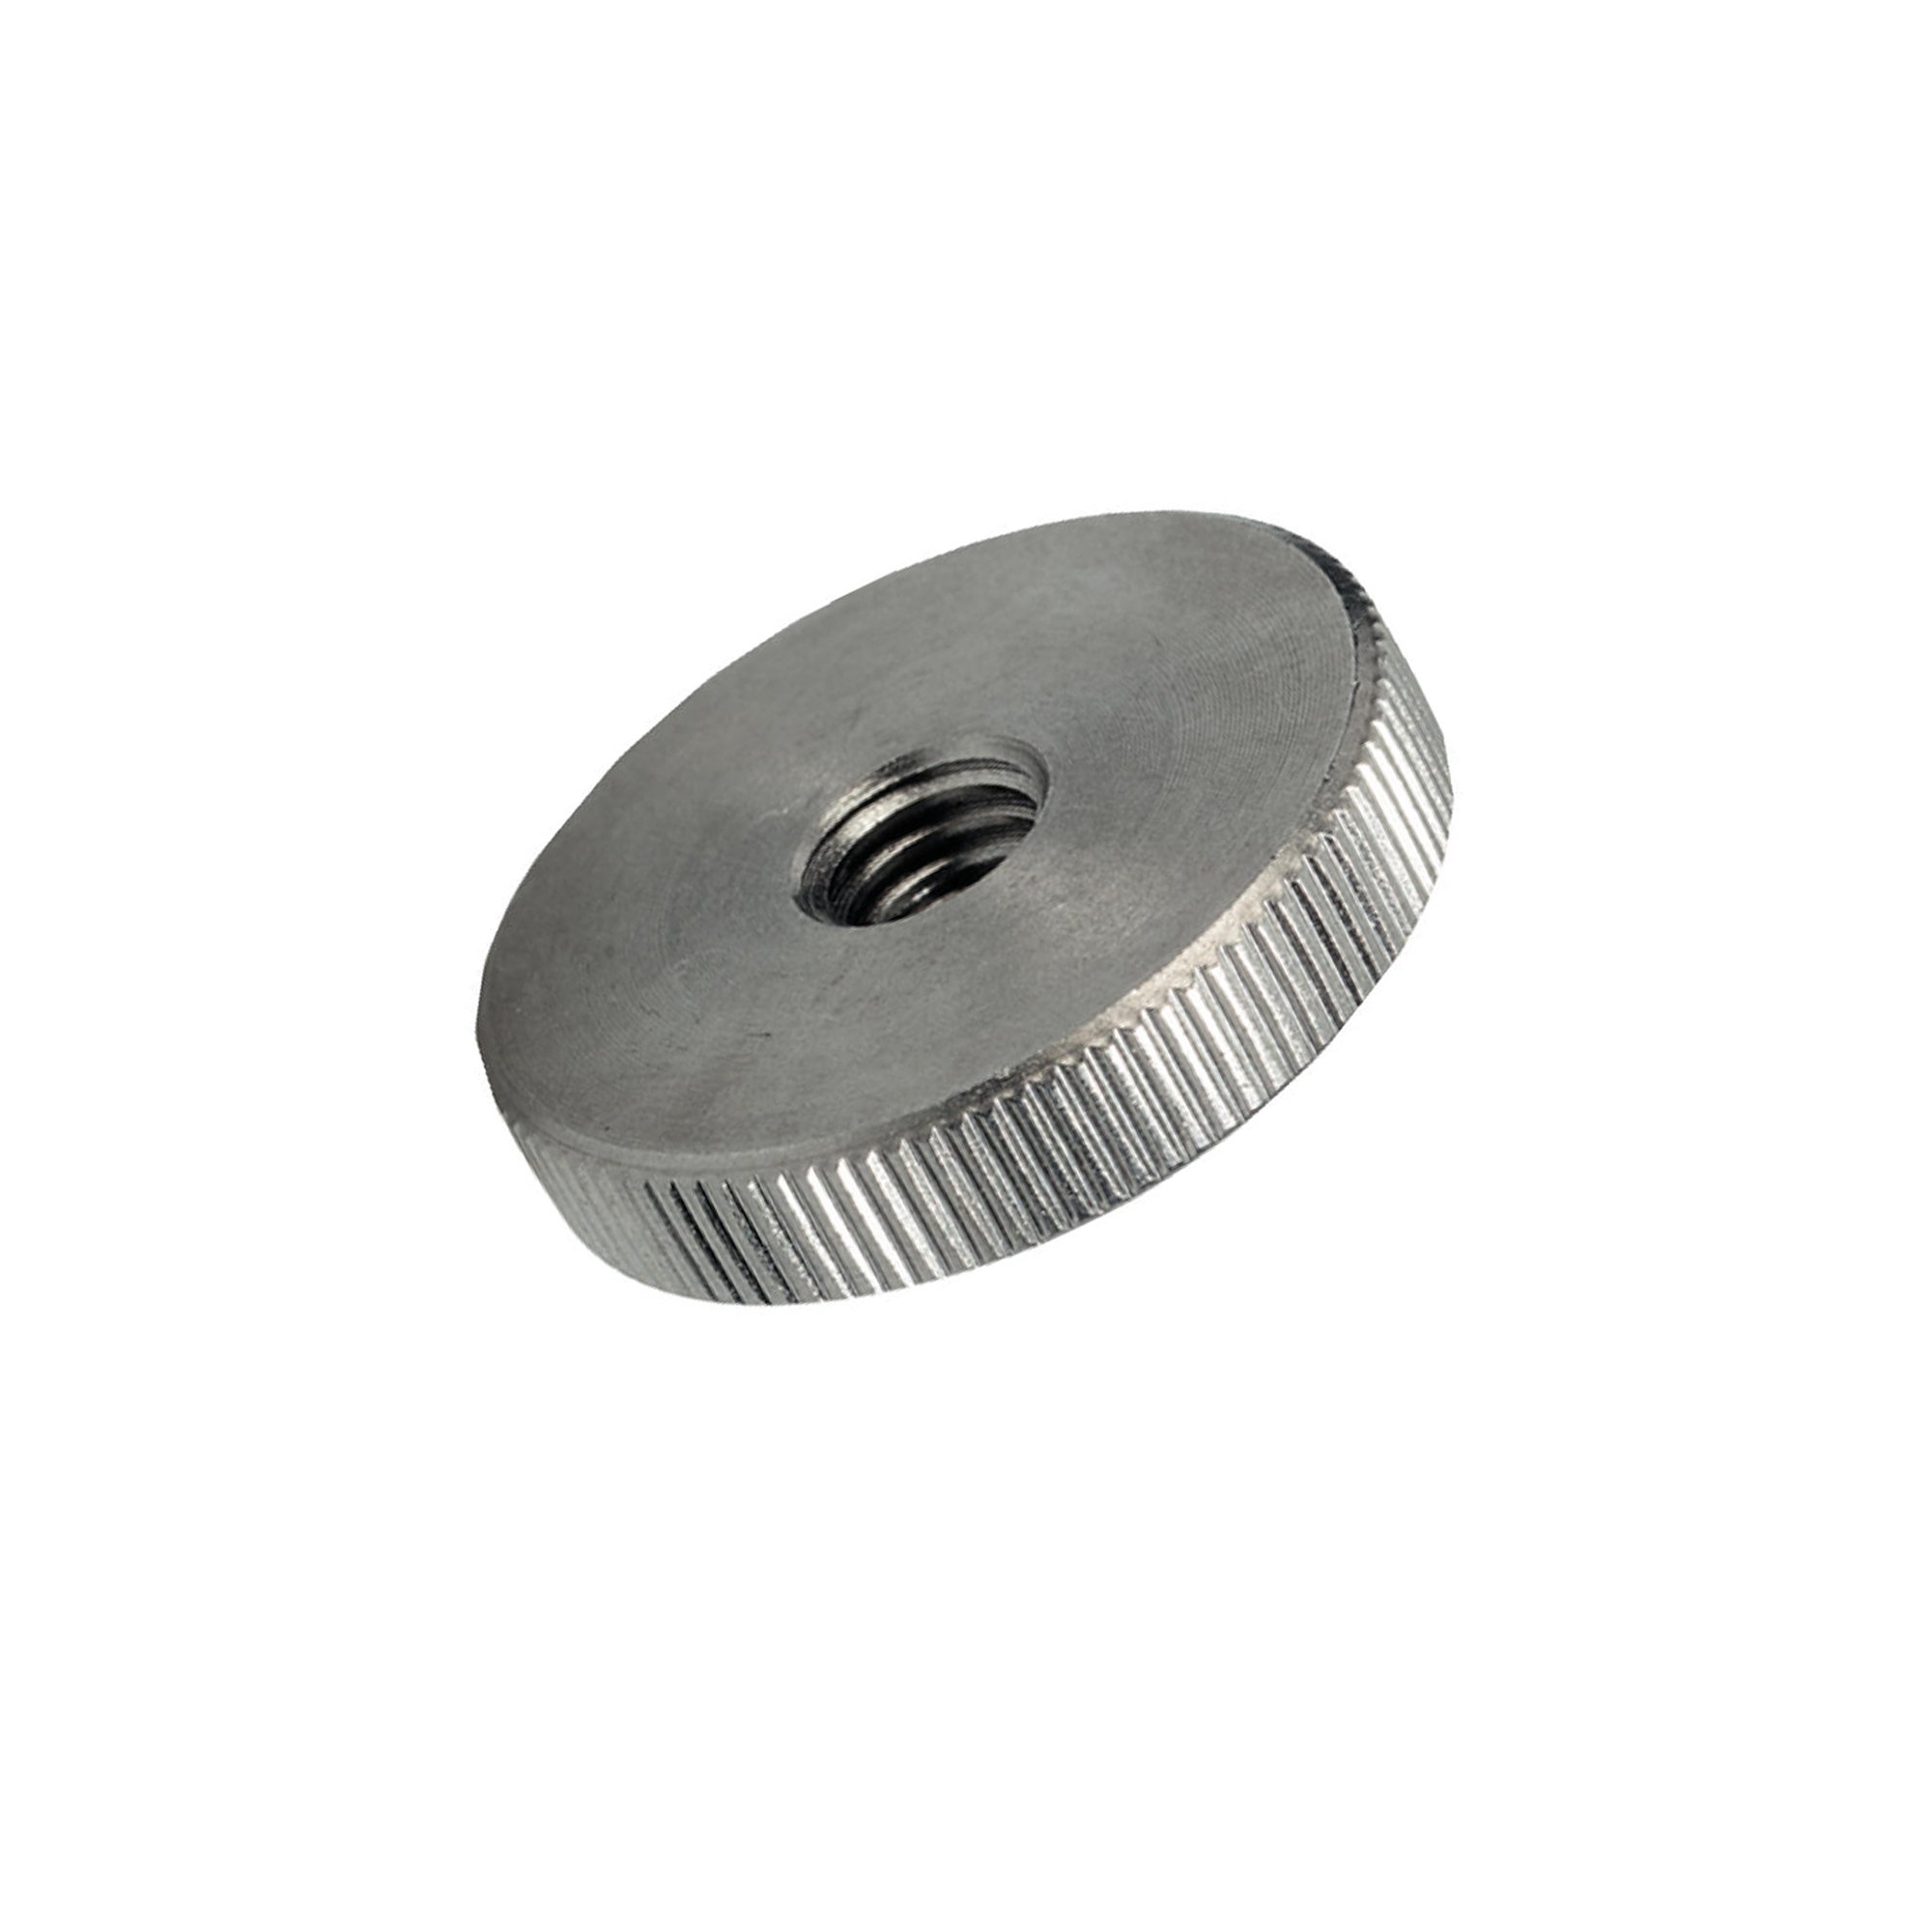 Knurled Thumb Nut Thin Type Stainless A1 Grip Knob DIN 467 M3,4,5,6,8,10 